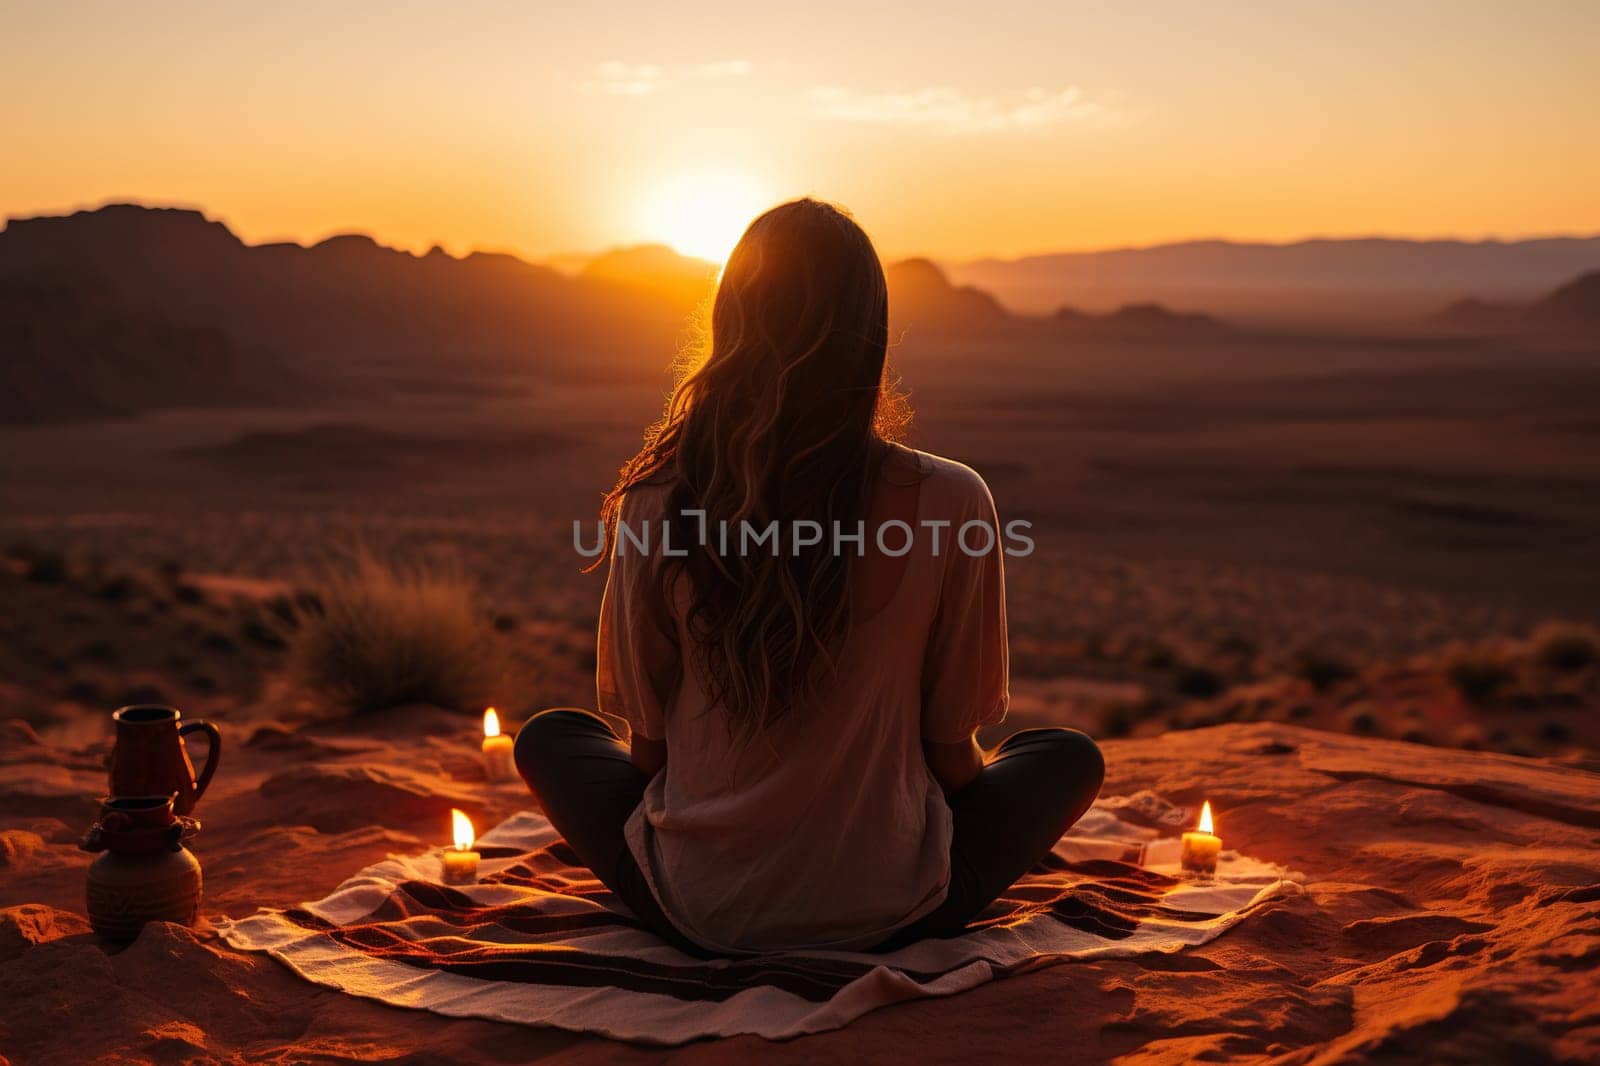 A woman in the lotus position looks at the sunset in the desert.